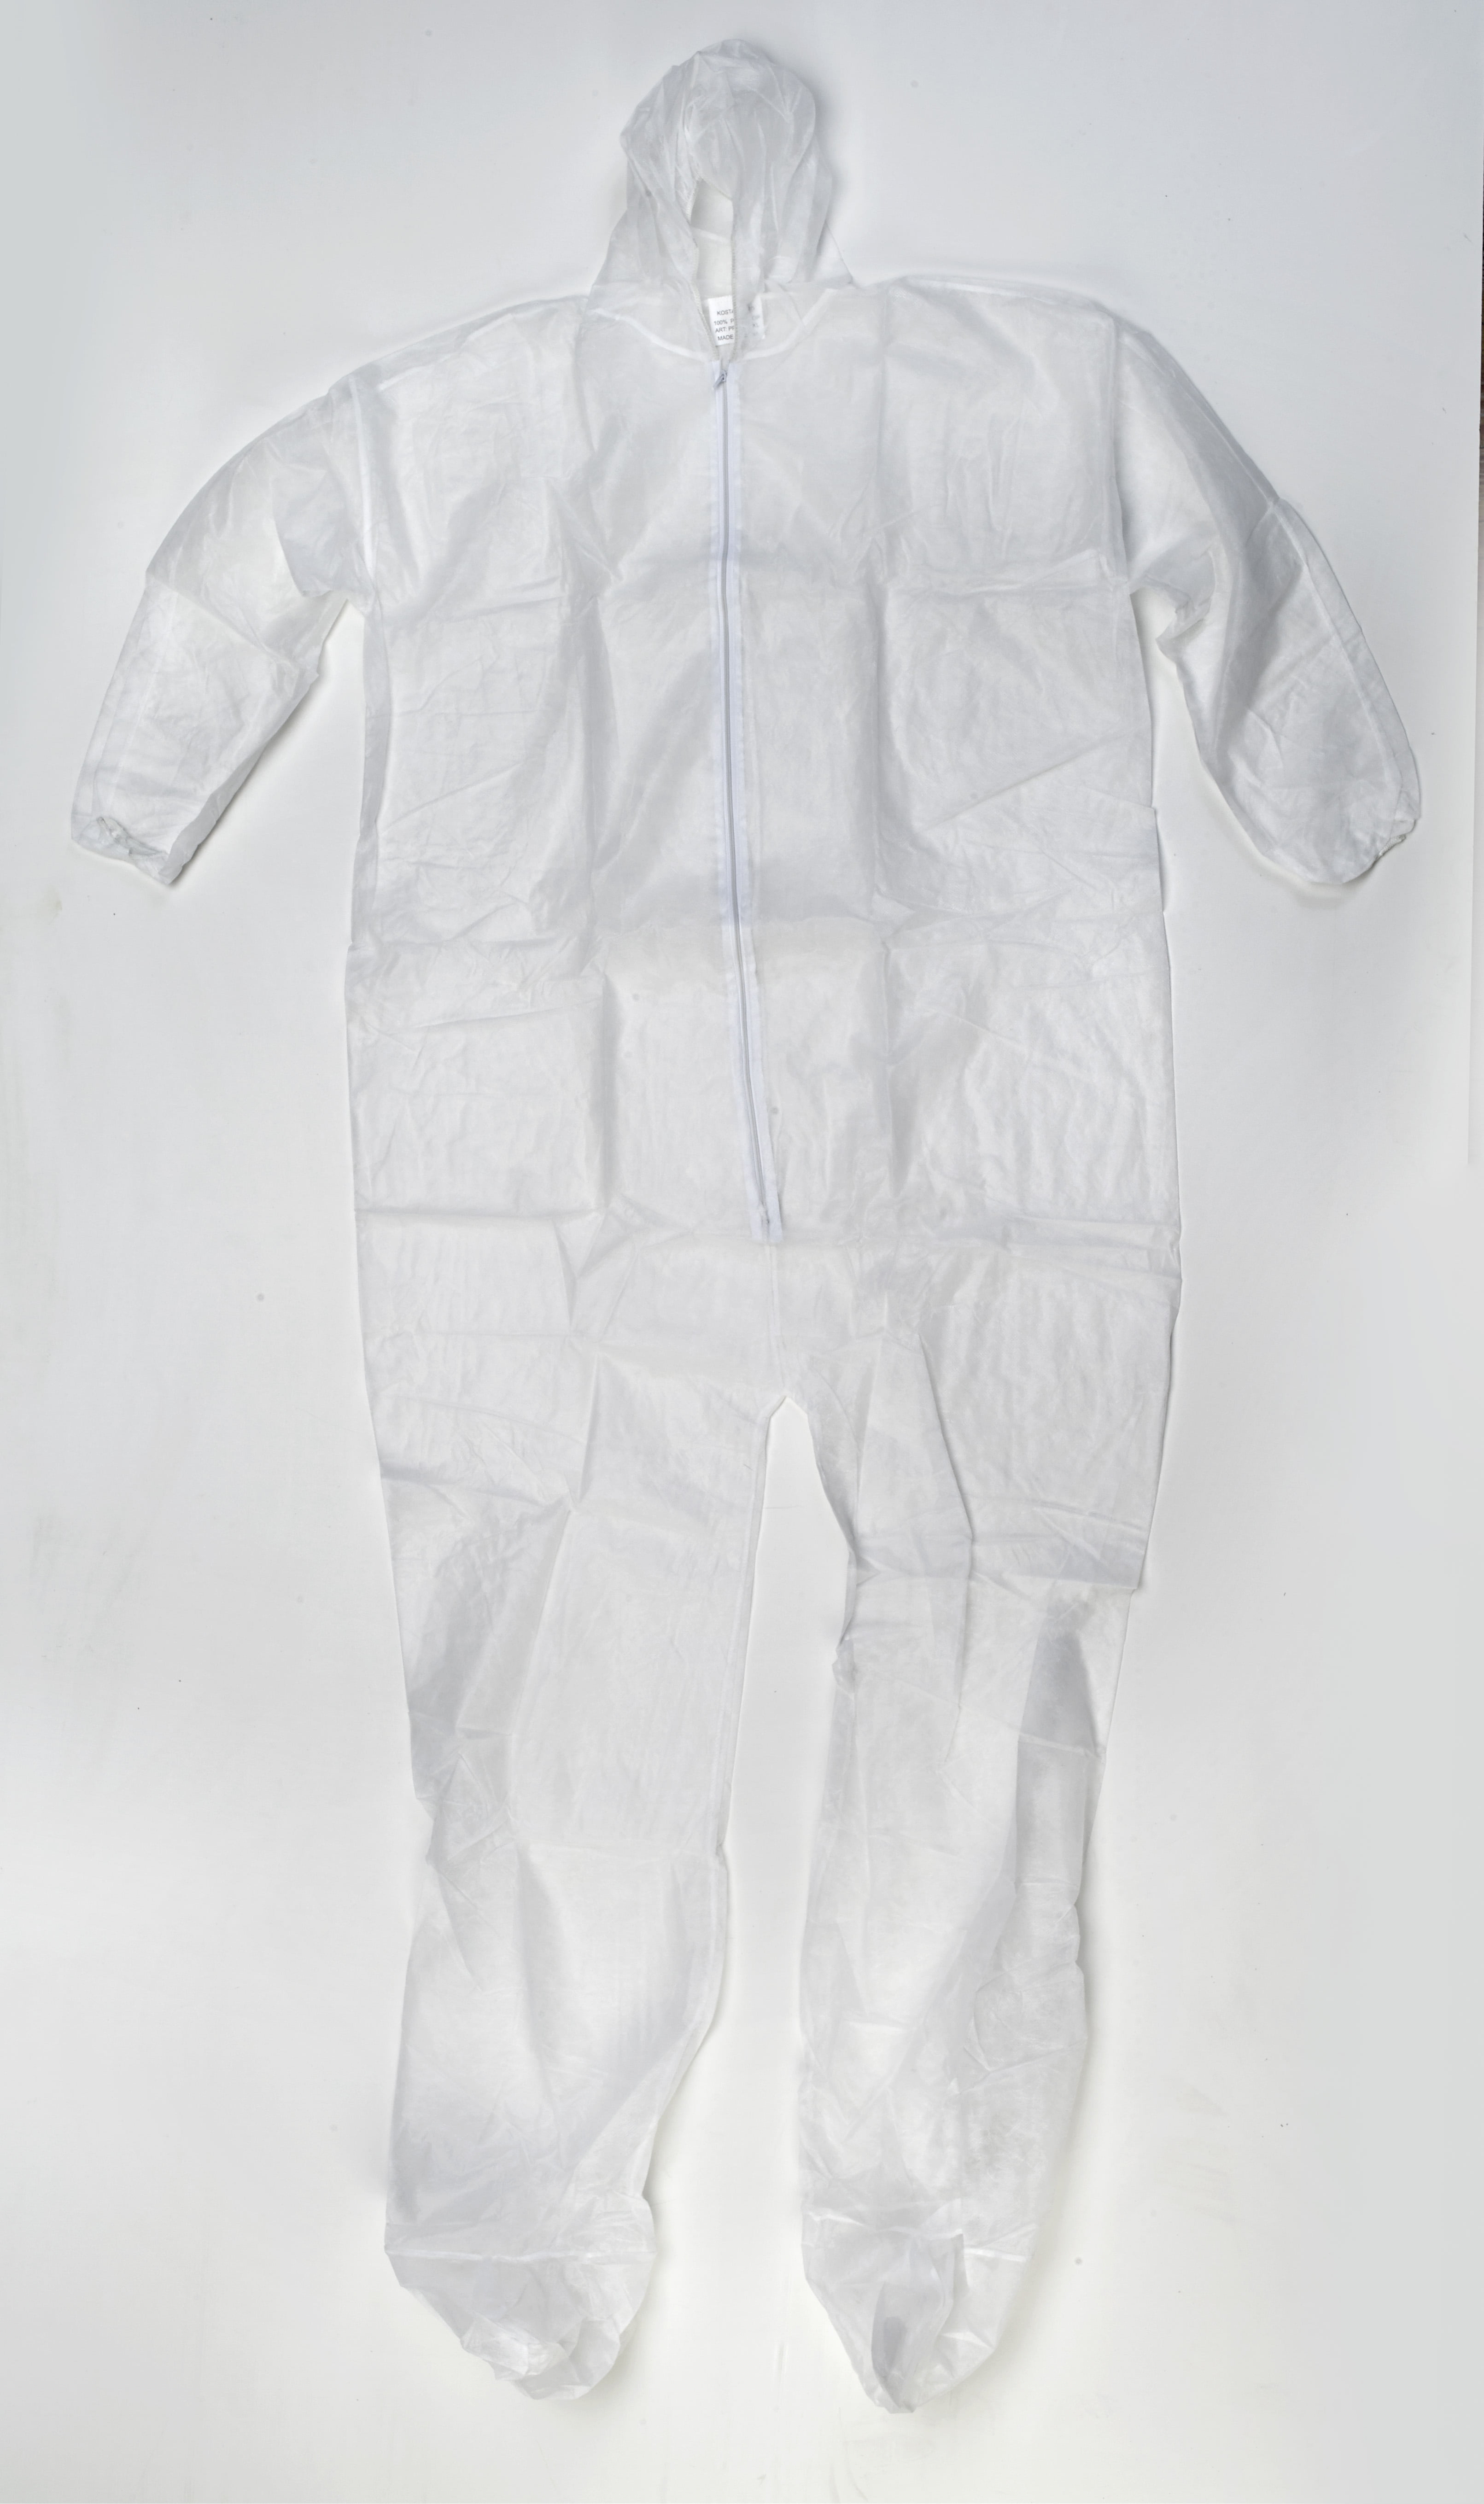 DUPONT TY122S XL X-LARGE TYVEK COVERALLS BUNNY SUIT CASE/25 